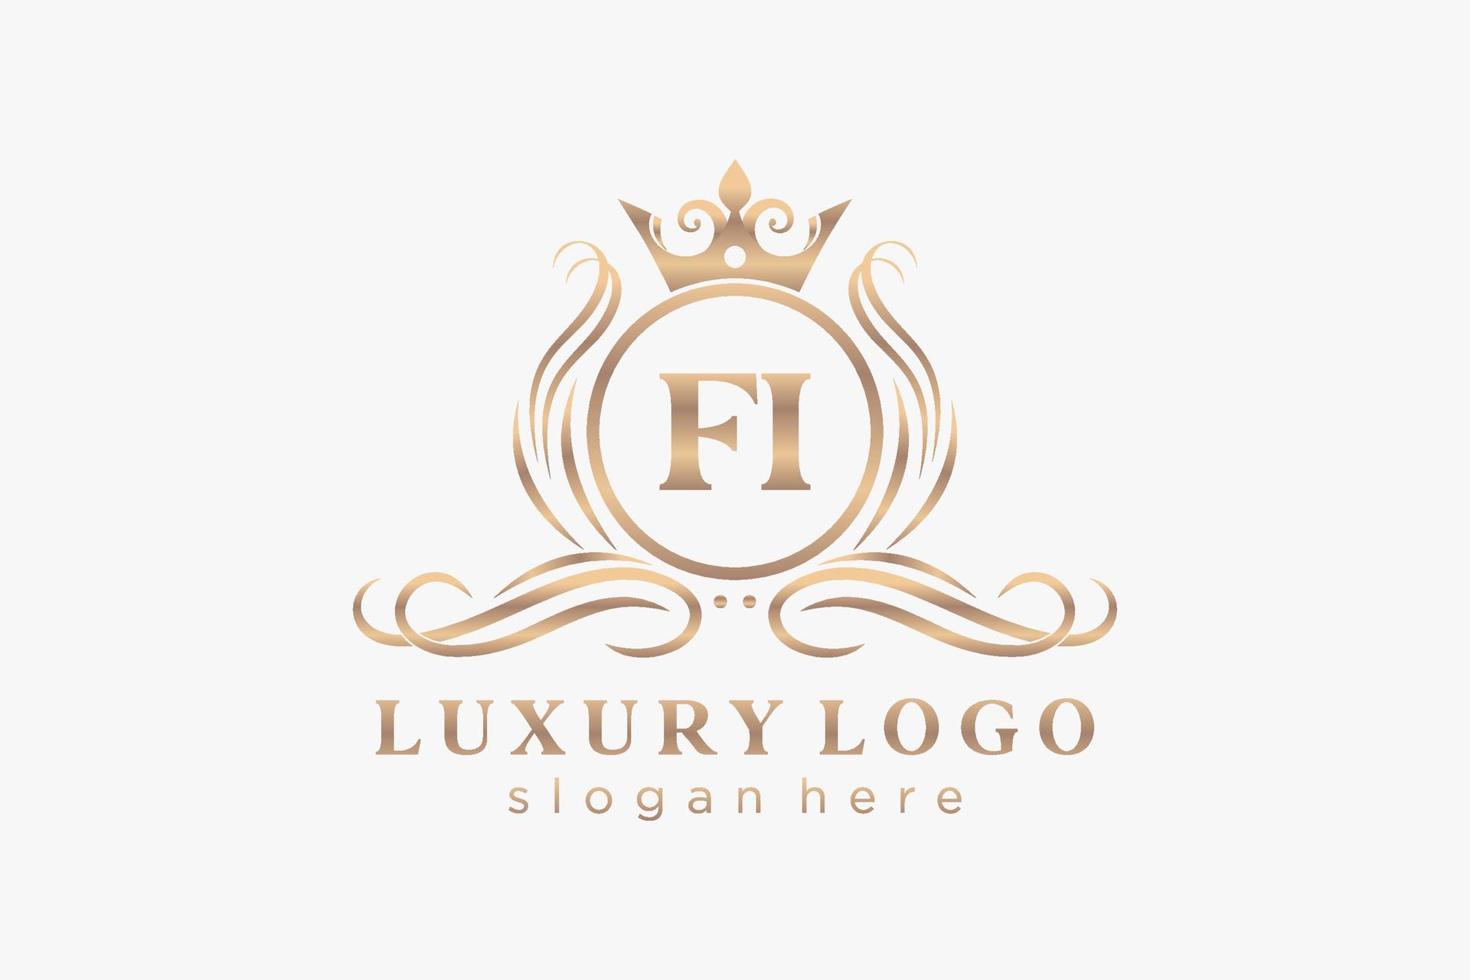 Initial FI Letter Royal Luxury Logo template in vector art for Restaurant, Royalty, Boutique, Cafe, Hotel, Heraldic, Jewelry, Fashion and other vector illustration.